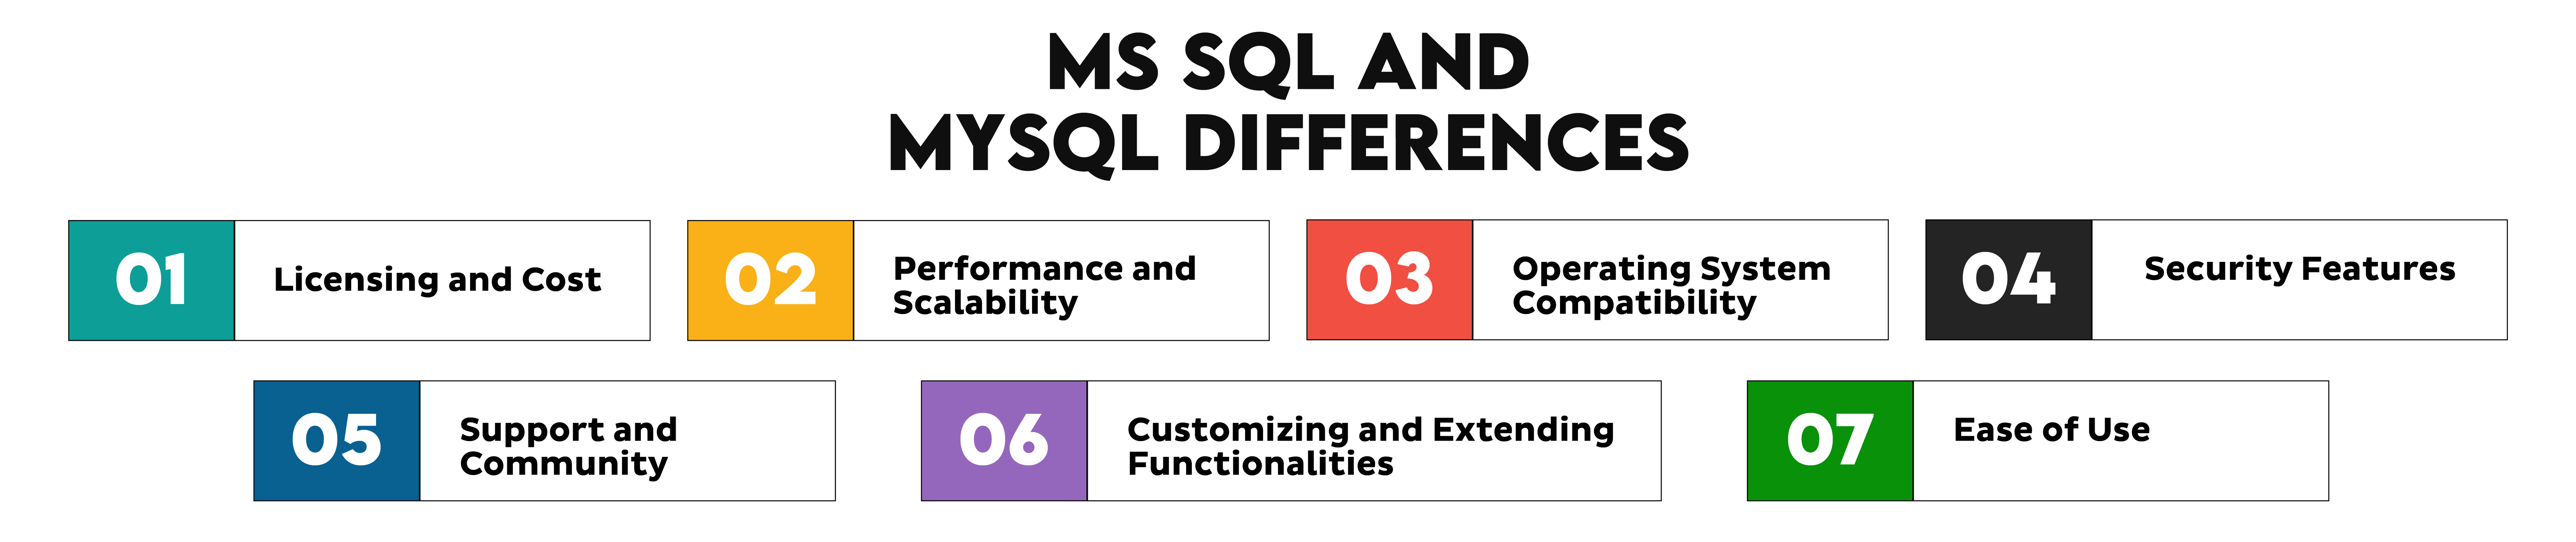 Differences Between MS SQL and MySQL